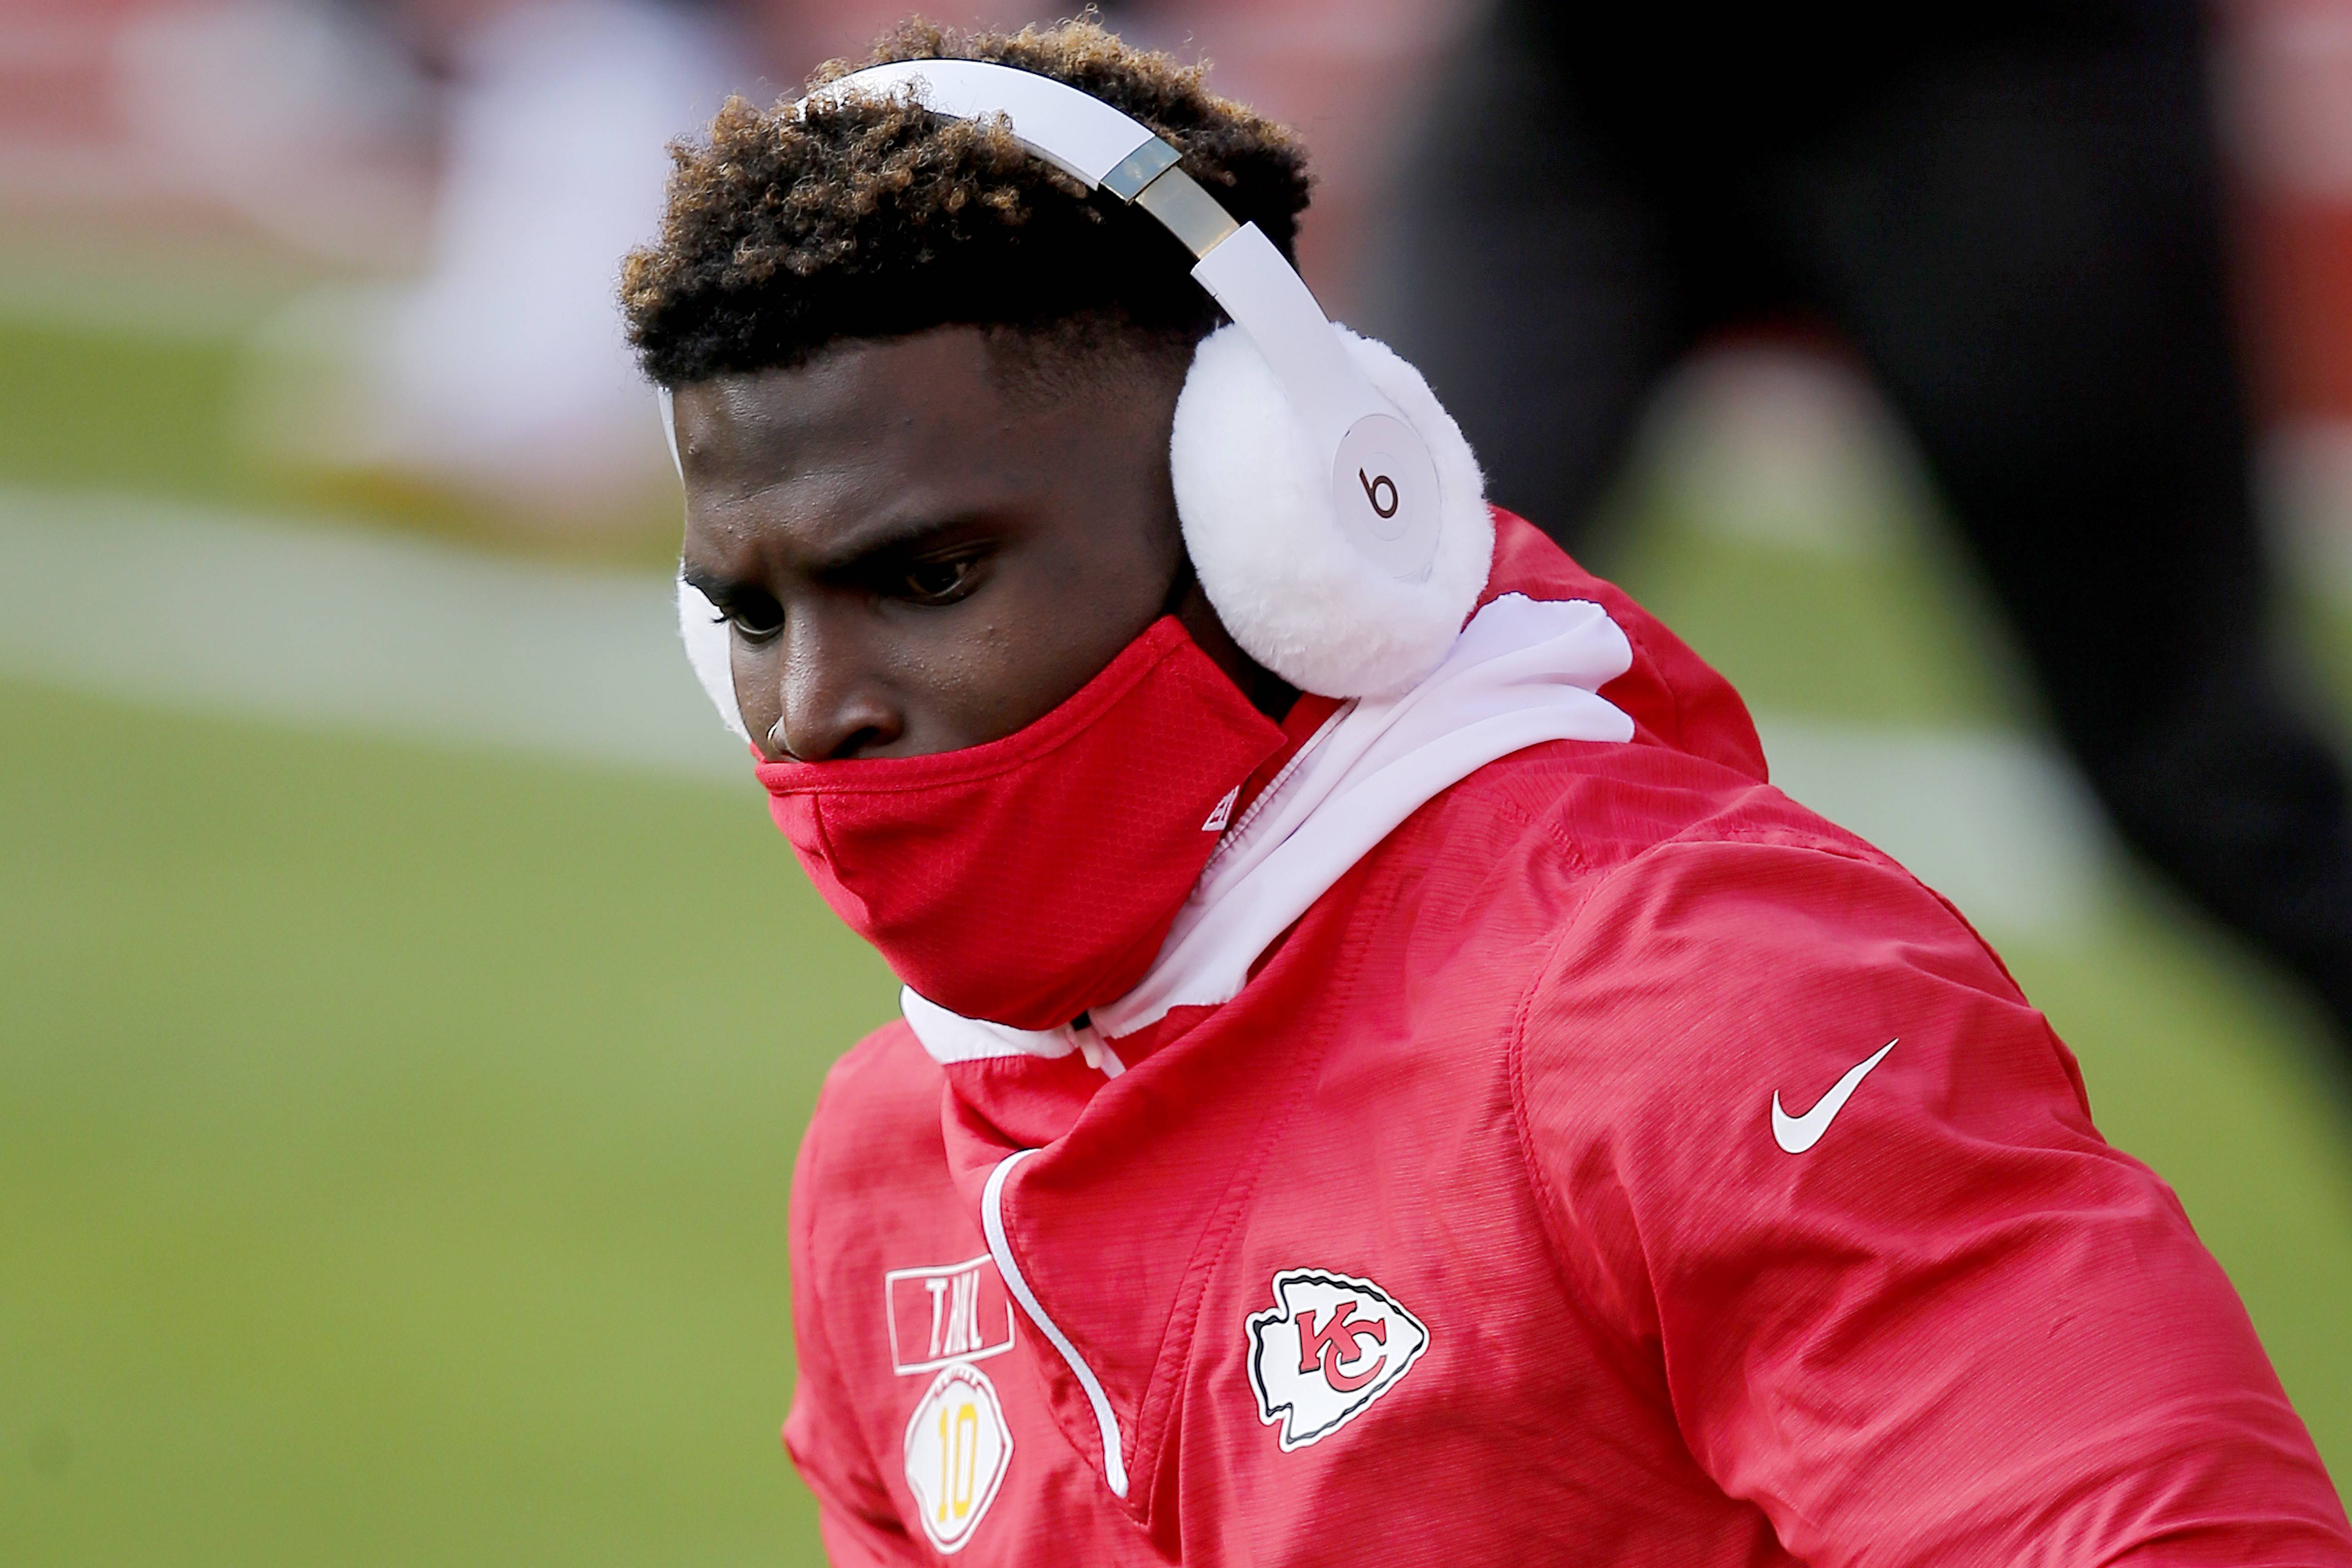 KANSAS CITY, MISSOURI - JANUARY 17: Wide receiver Tyreek Hill #10 of the Kansas City Chiefs warms up prior to the AFC Divisional Playoff game against the Cleveland Browns at Arrowhead Stadium on January 17, 2021 in Kansas City, Missouri. (Photo by David Eulitt/Getty Images)